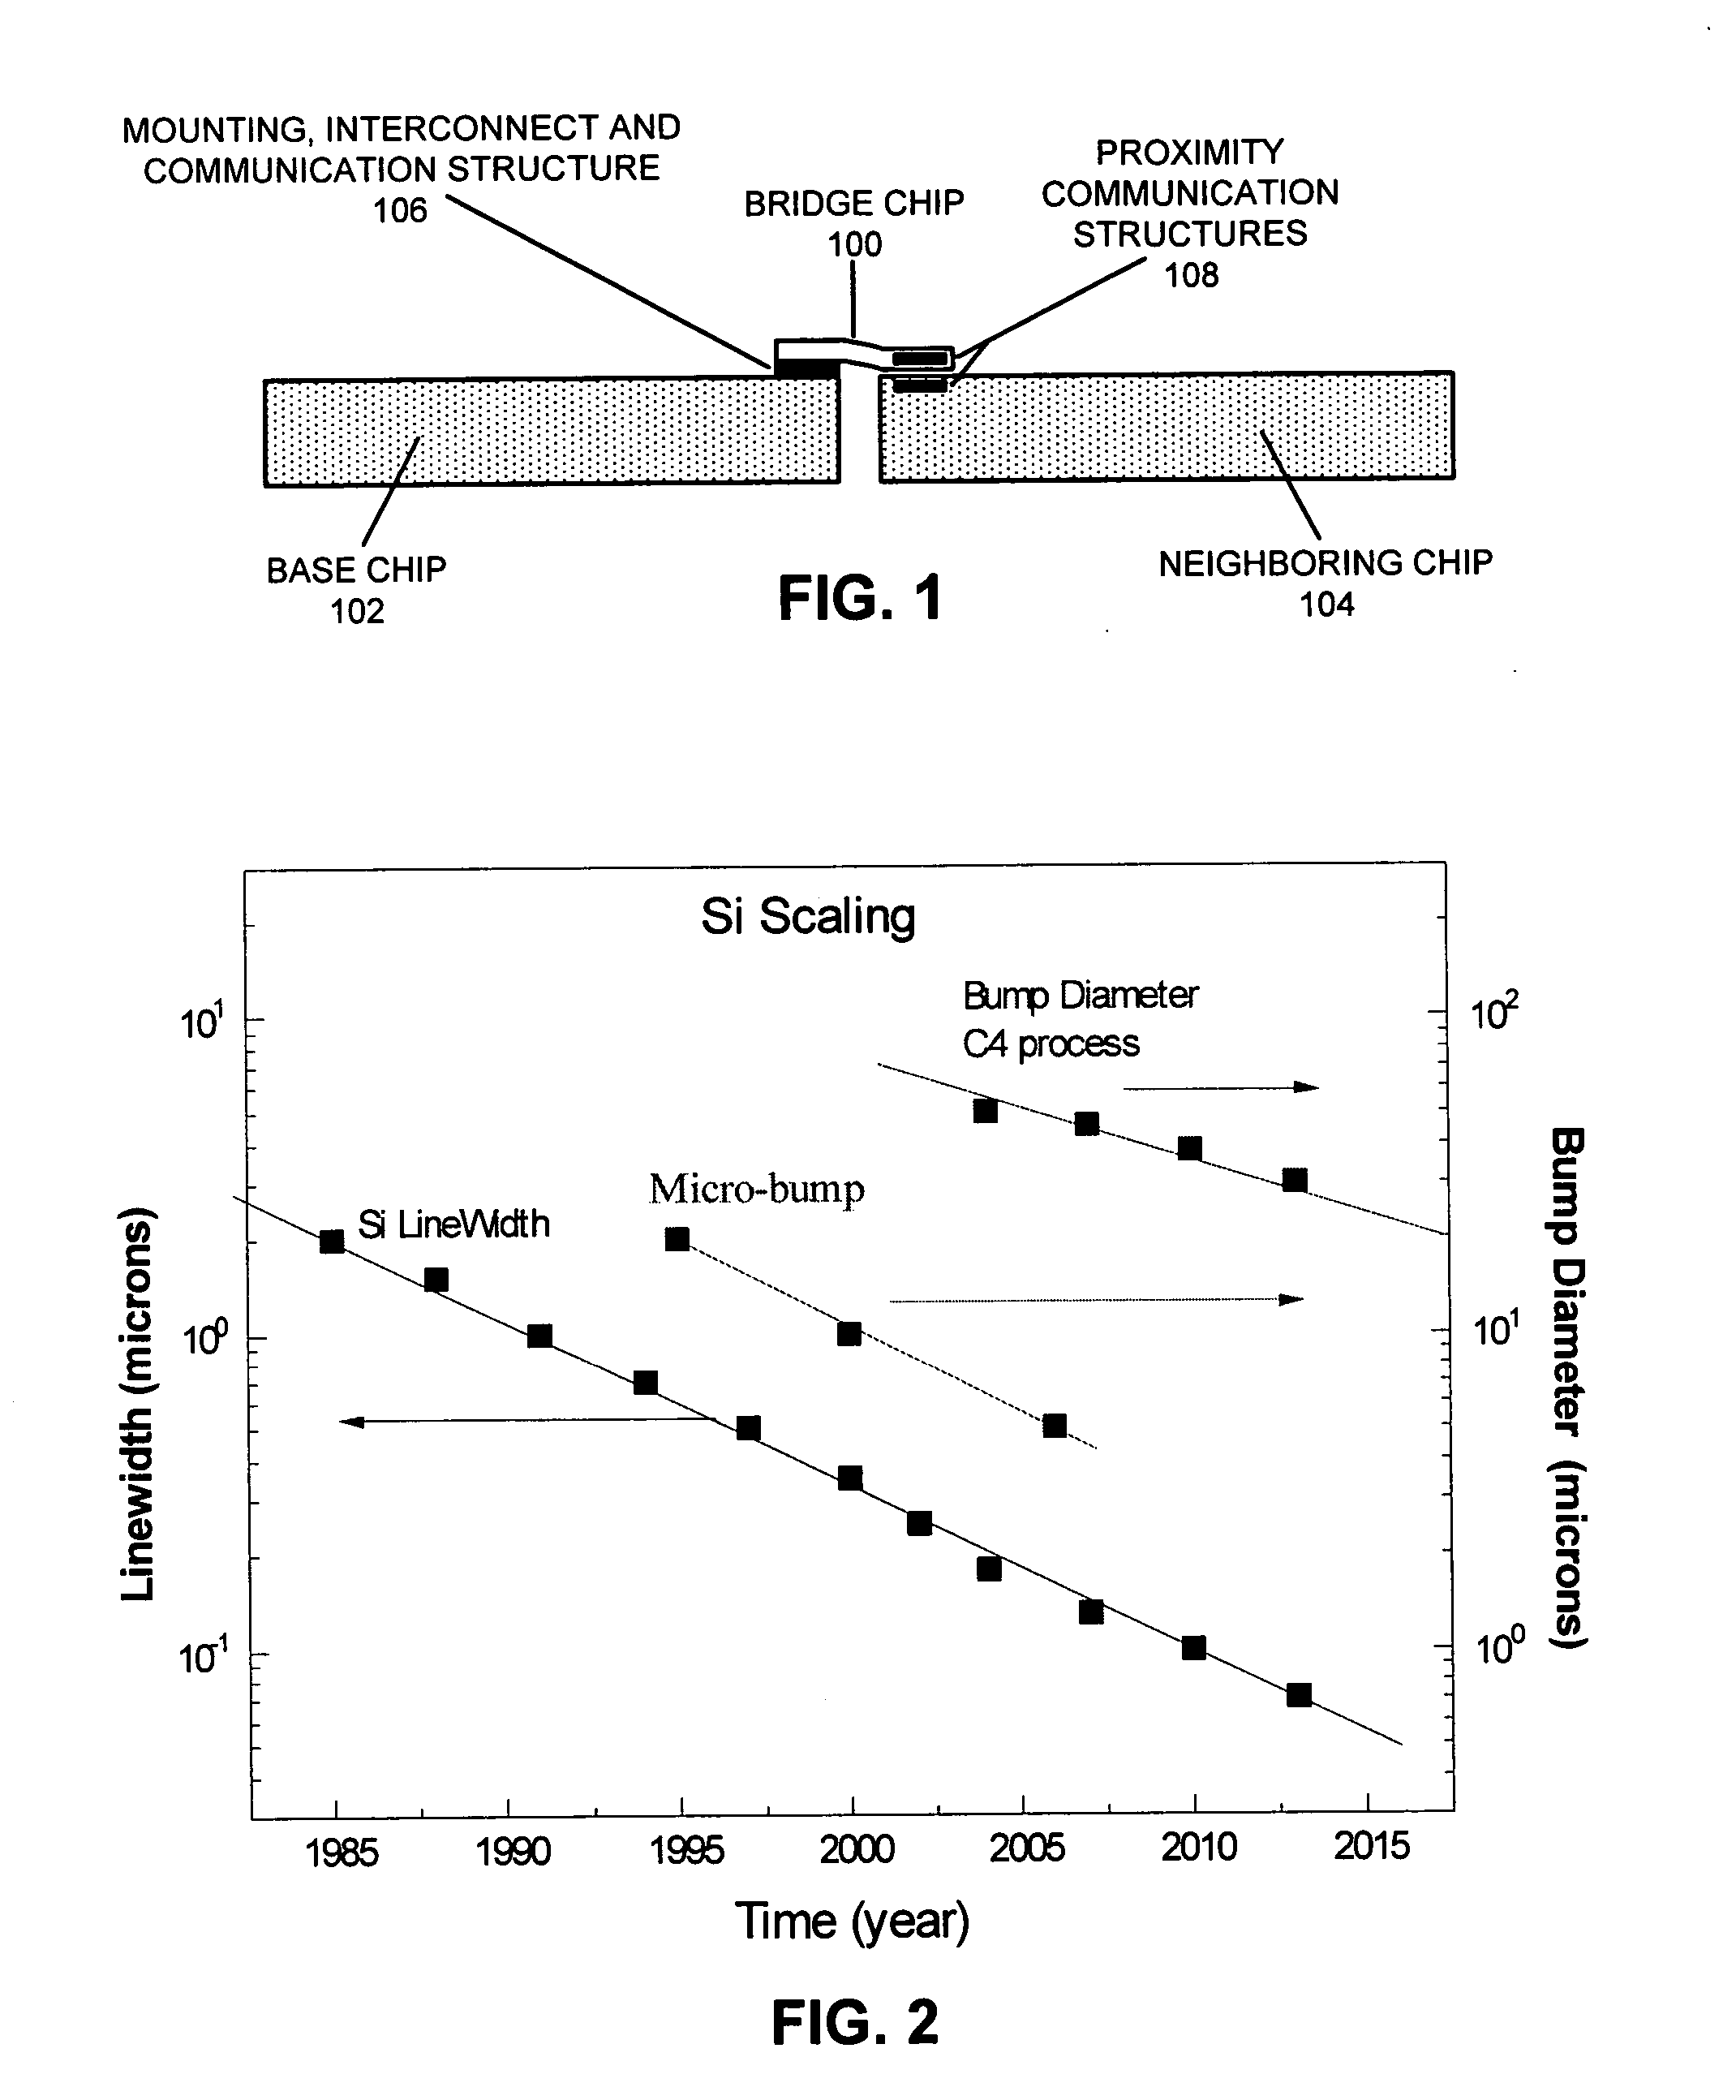 Structures and methods for proximity communication using bridge chips